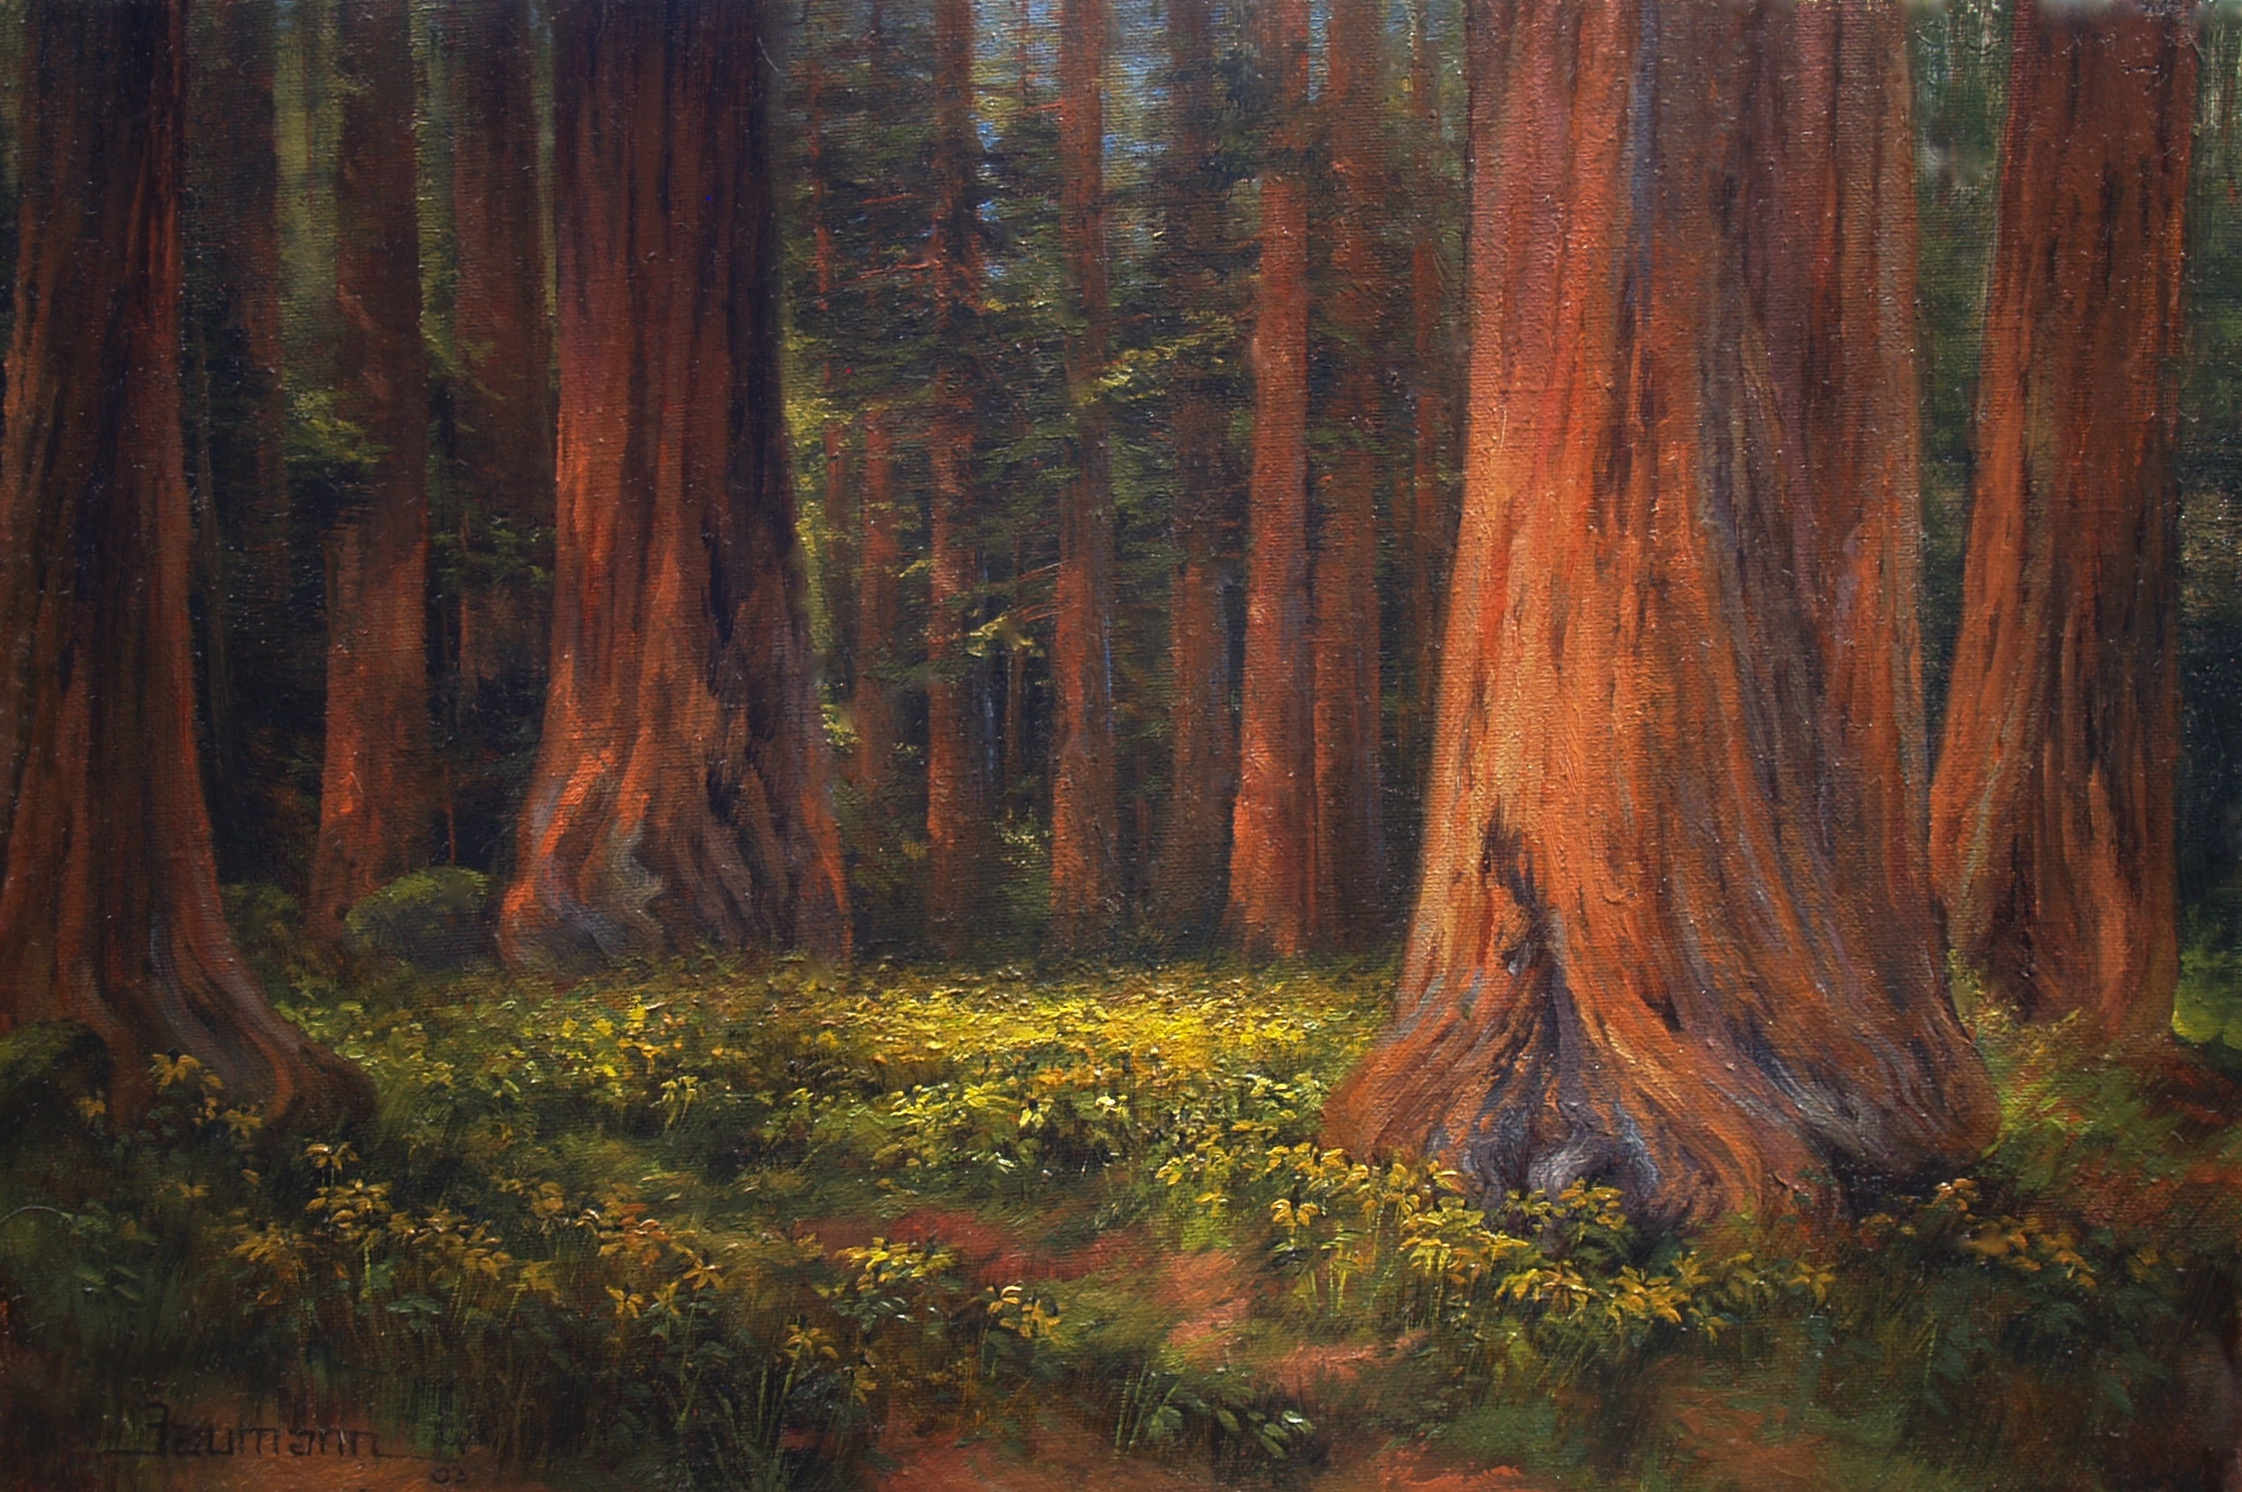 Sequoia National Park: Among the Giants